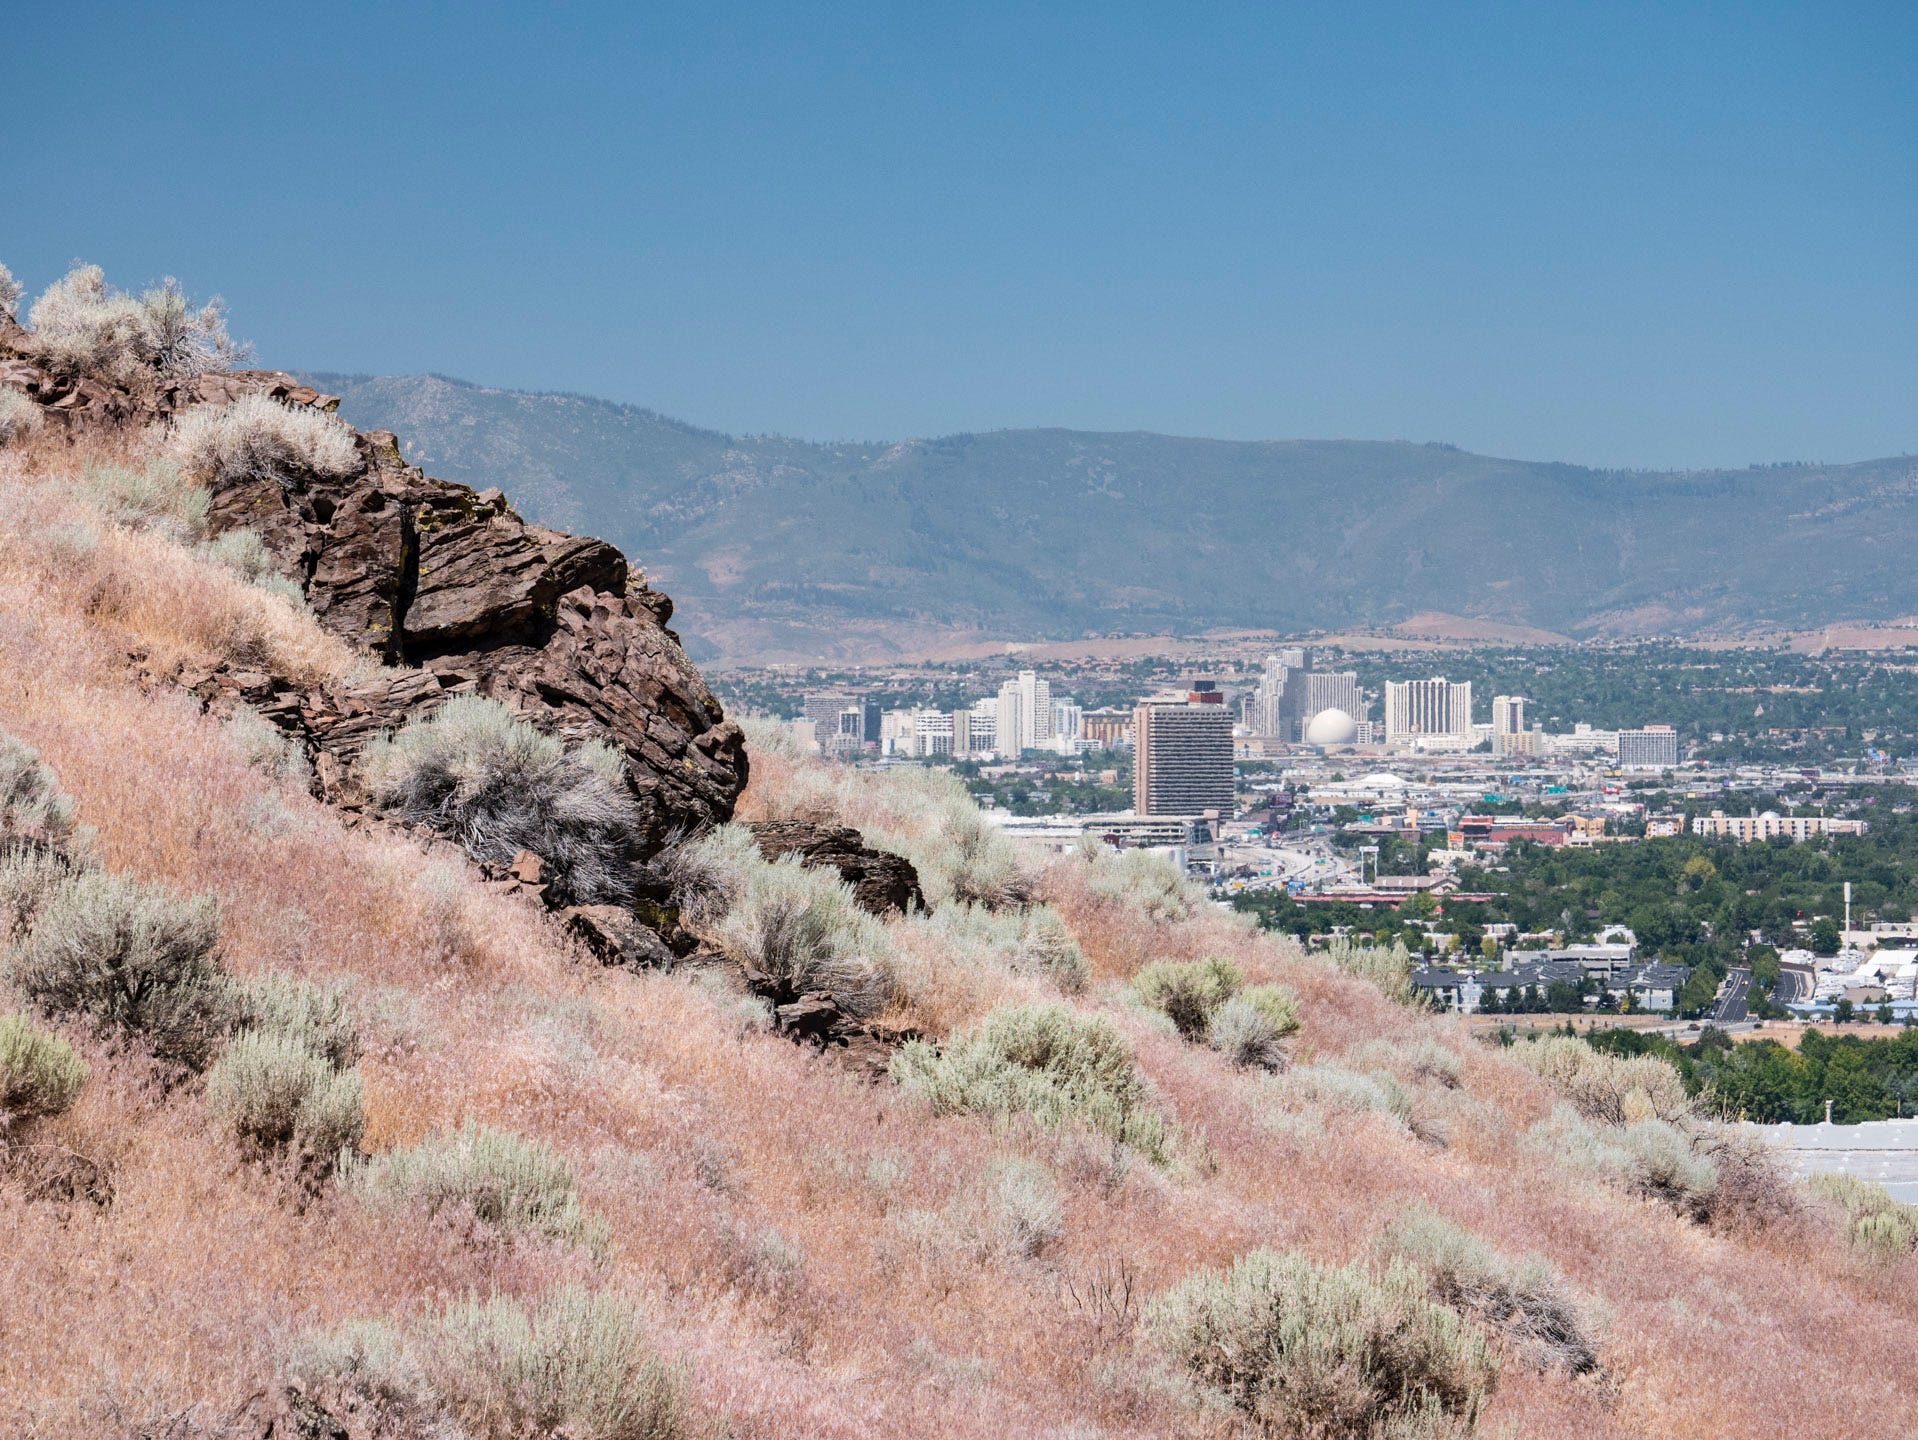 Photo of Reno, Nevada sitting in a valley. In the hazy distance is a tall mountain range with patches of trees on its flanks. Reno sits in the valley in front of the mountain range, a mix of green trees surrounding a downtown of tall buildings, mostly white. A spherical structure can be seen beside a tall hotel casino. In the foreground occupying the lower left of the frame are the green and pink grasses of a nearby hillside along with a brown rocky outcropping. Part of Reno is obscured by the hillside in the foreground.